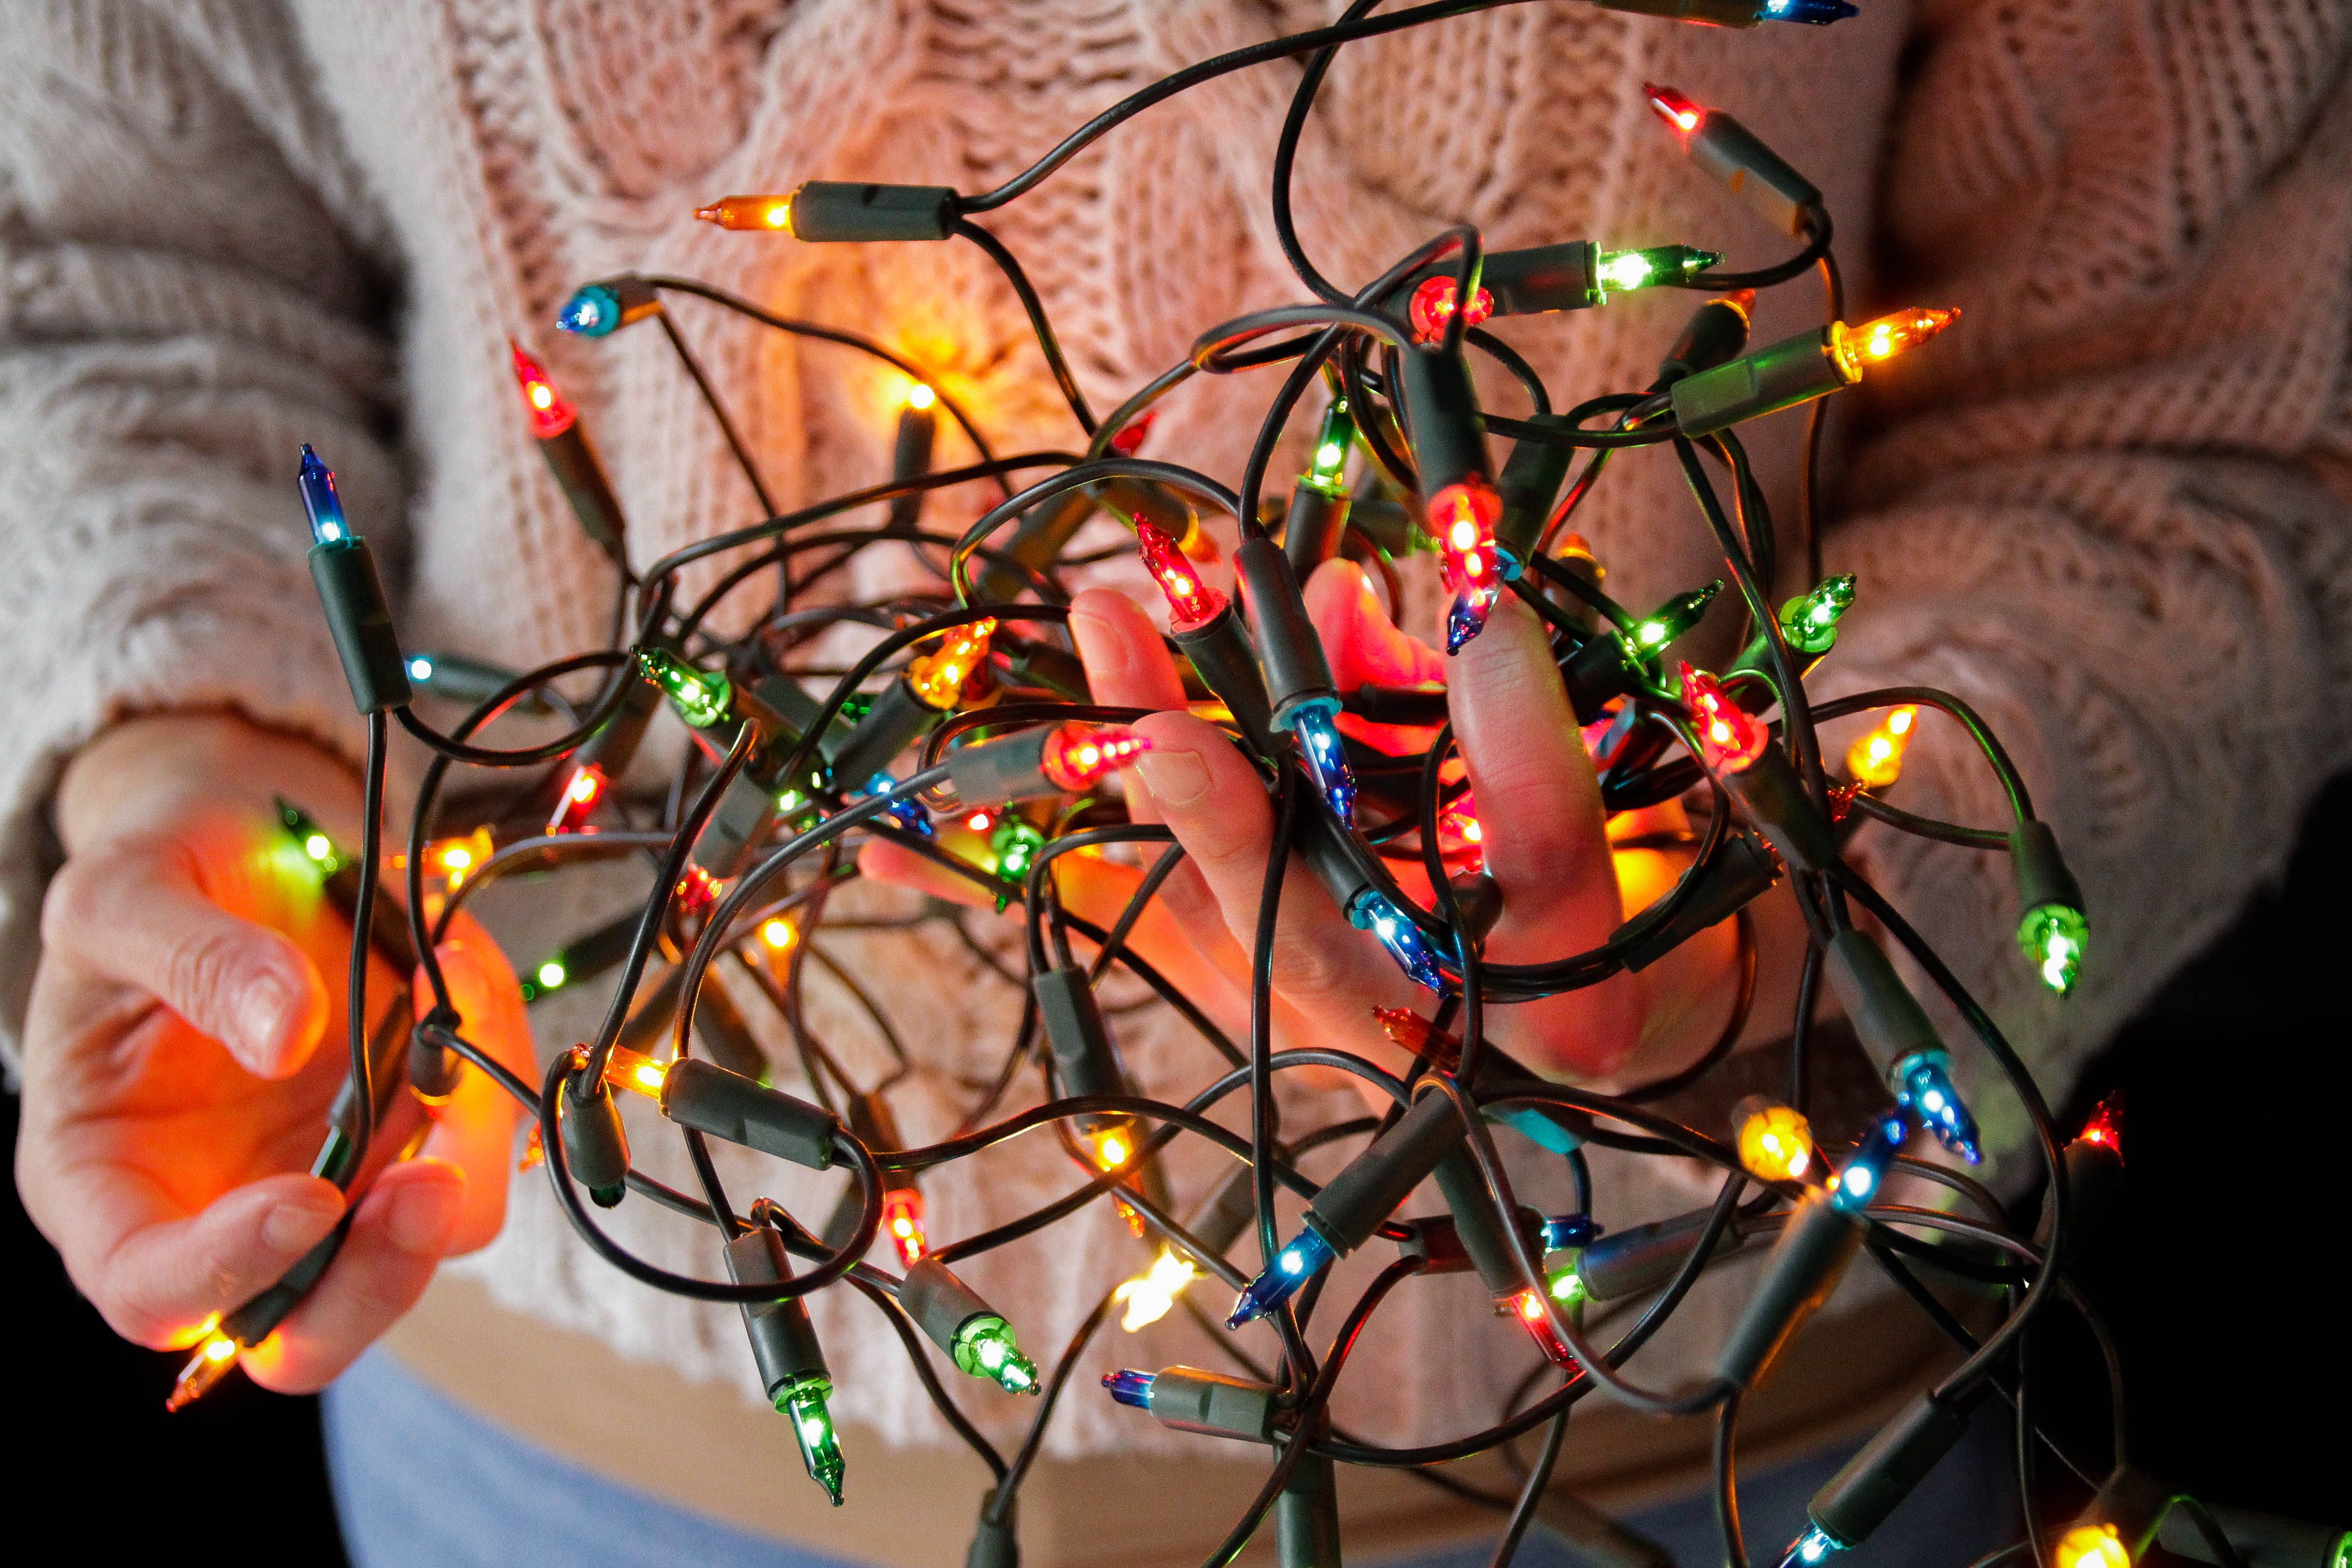 How to Recycle Christmas Lights - Where to Recycle Holiday Lights